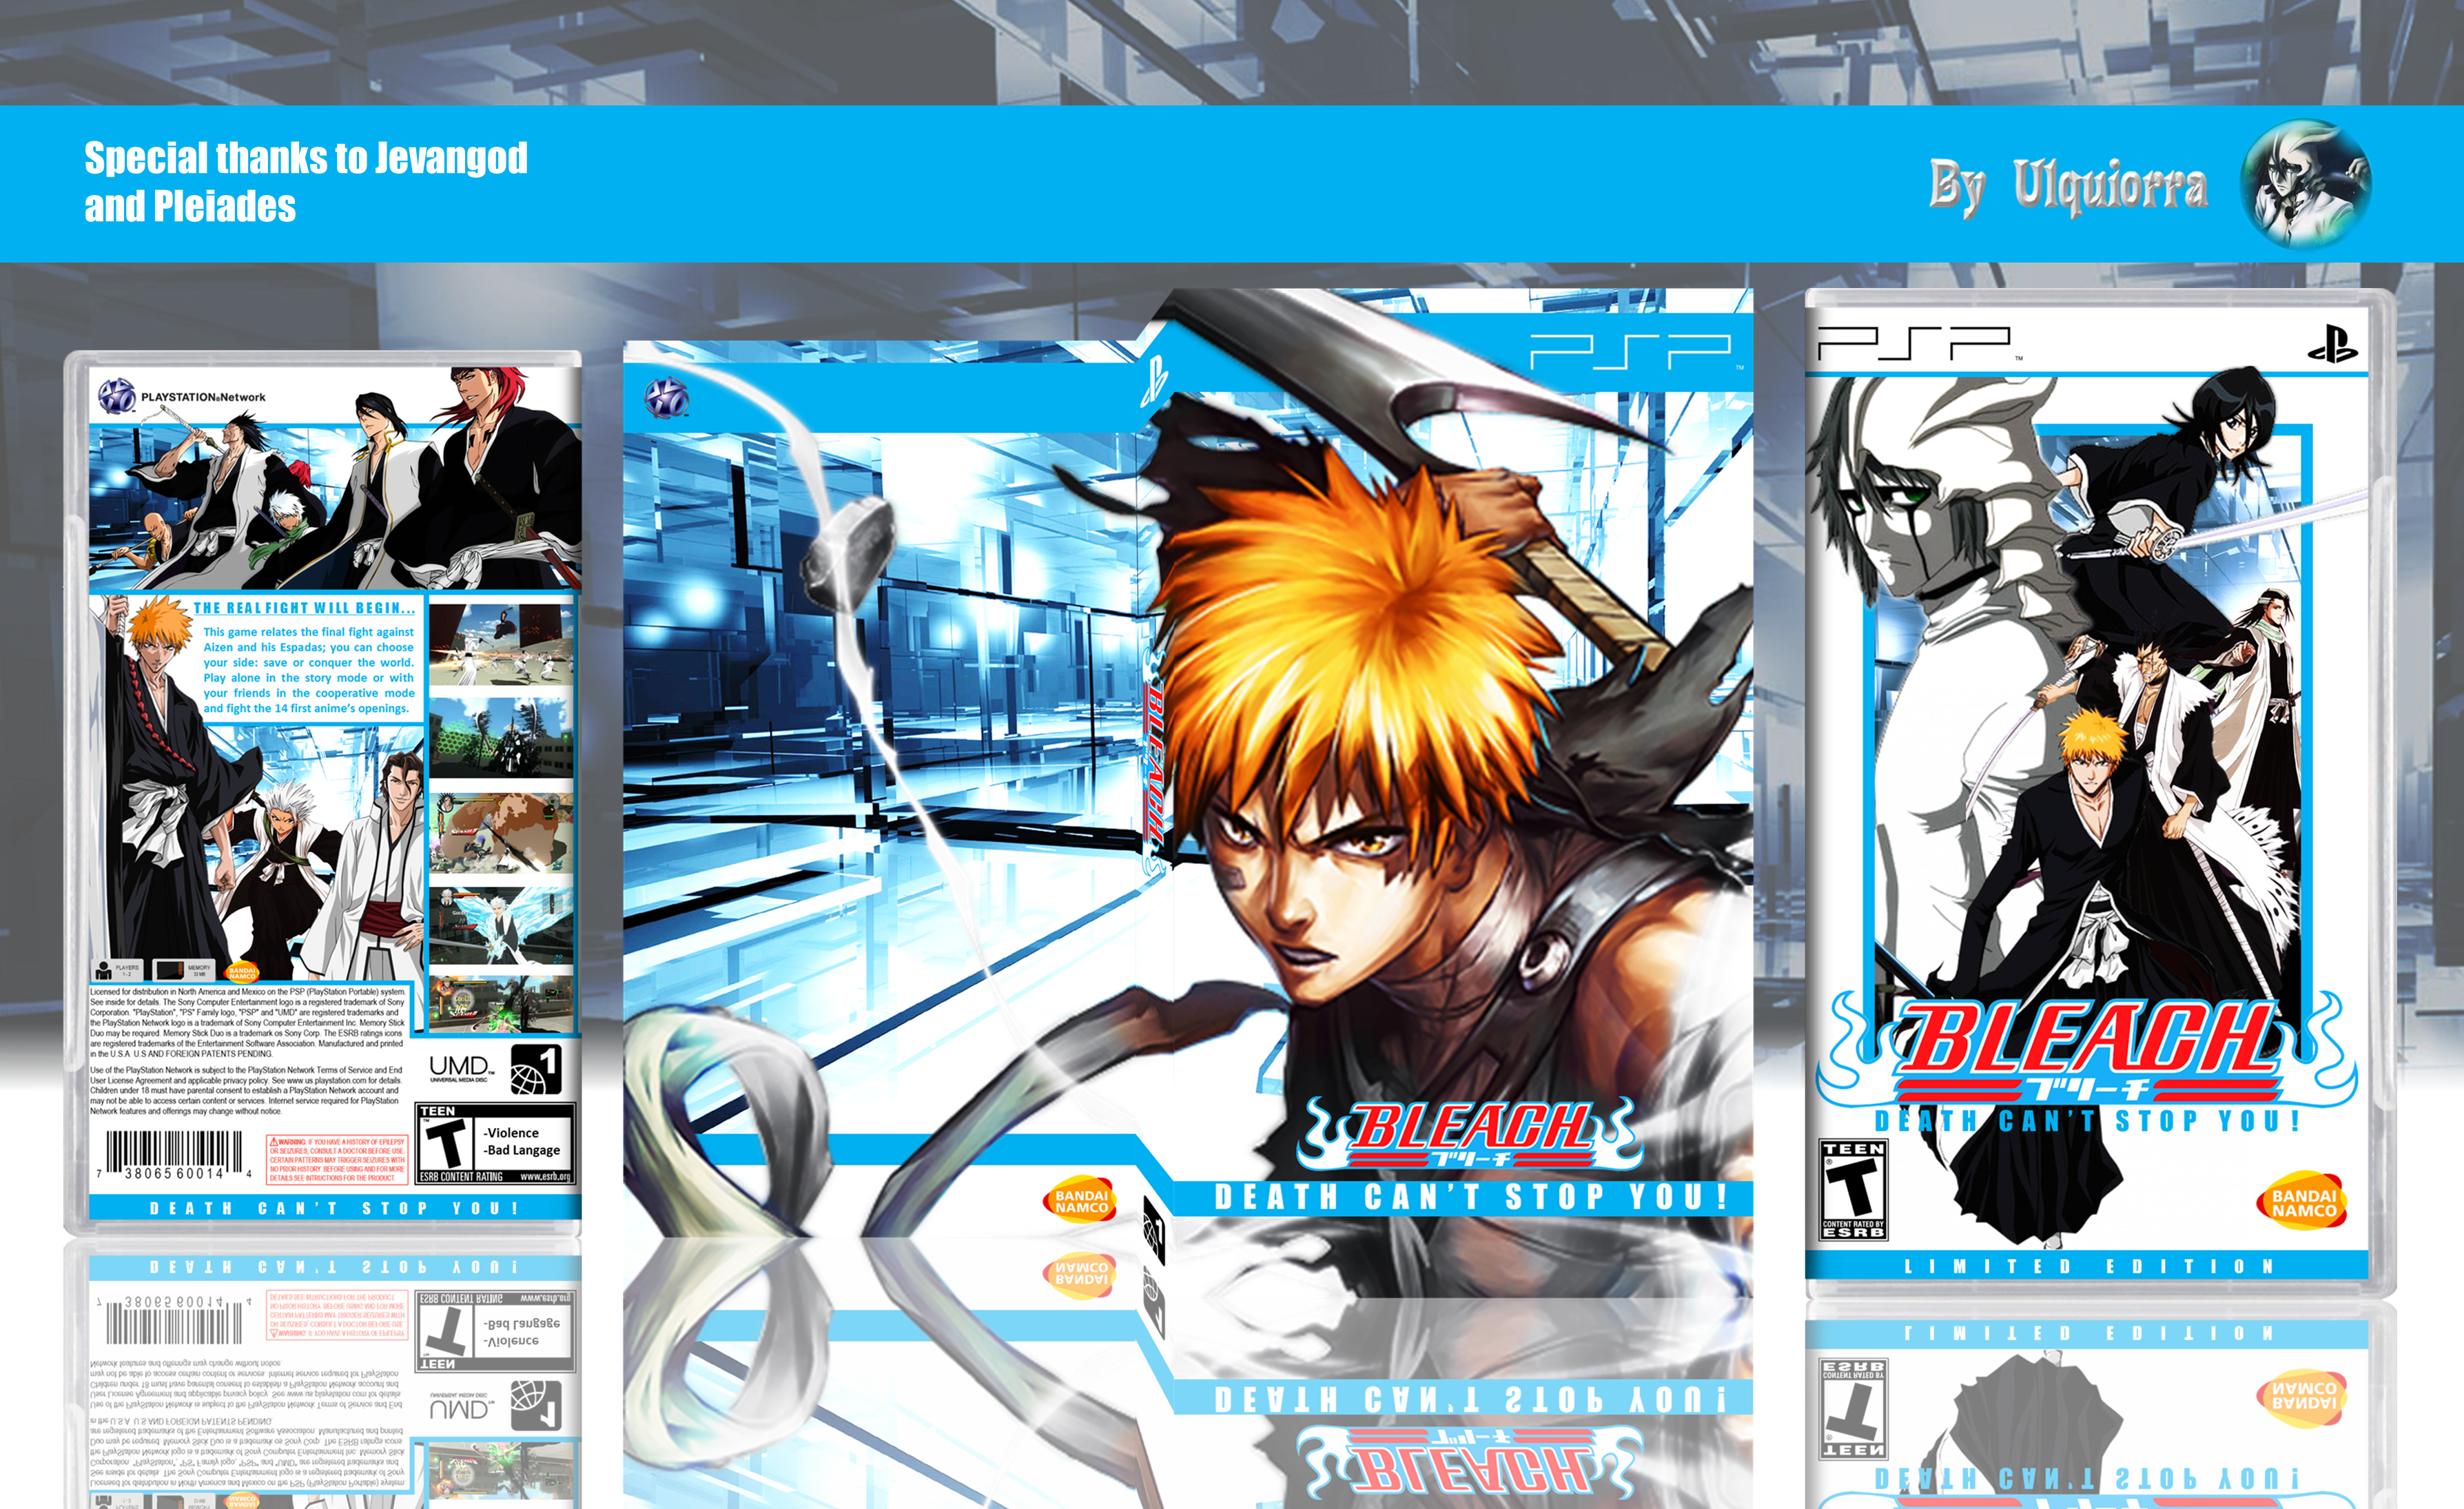 Bleach: Death can't stop you ! box cover